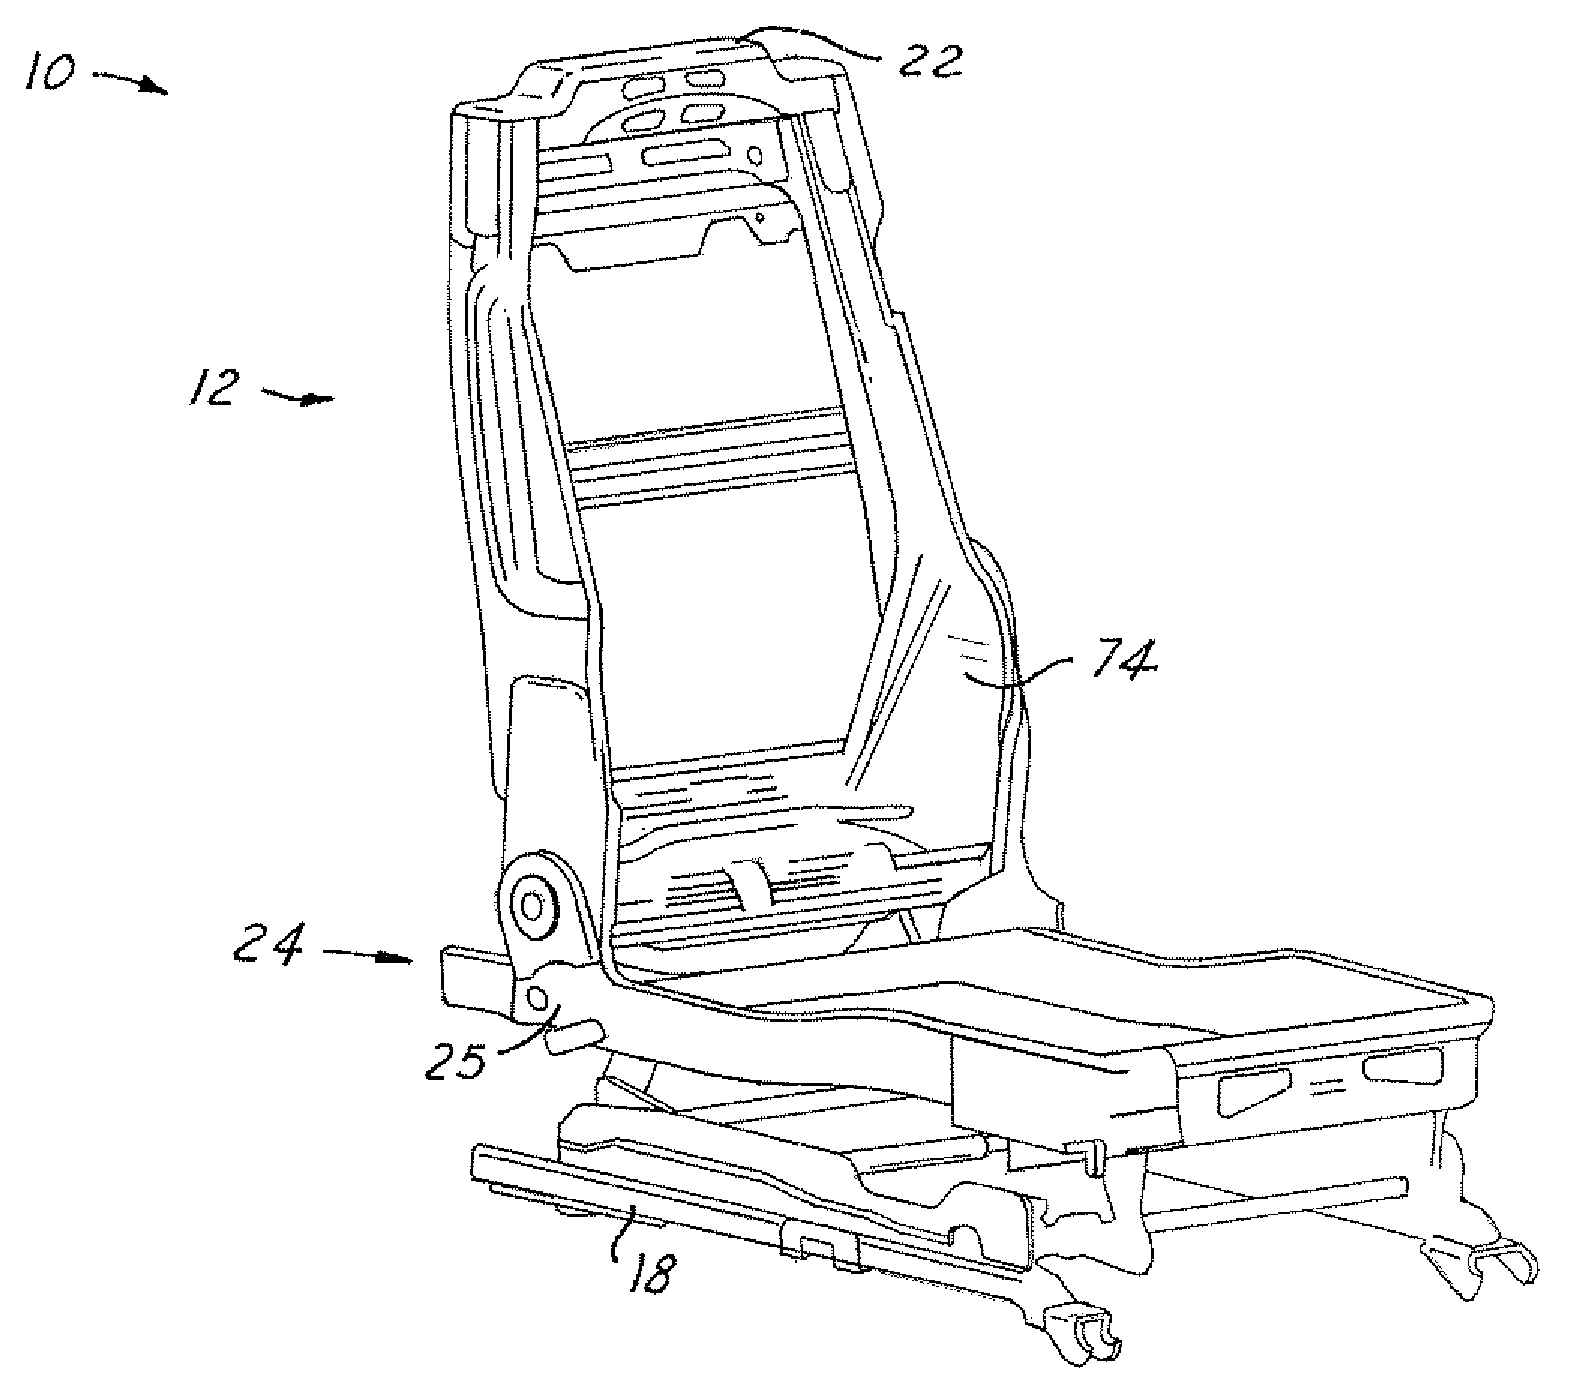 Automotive seat assembly with improved side impact rigidity